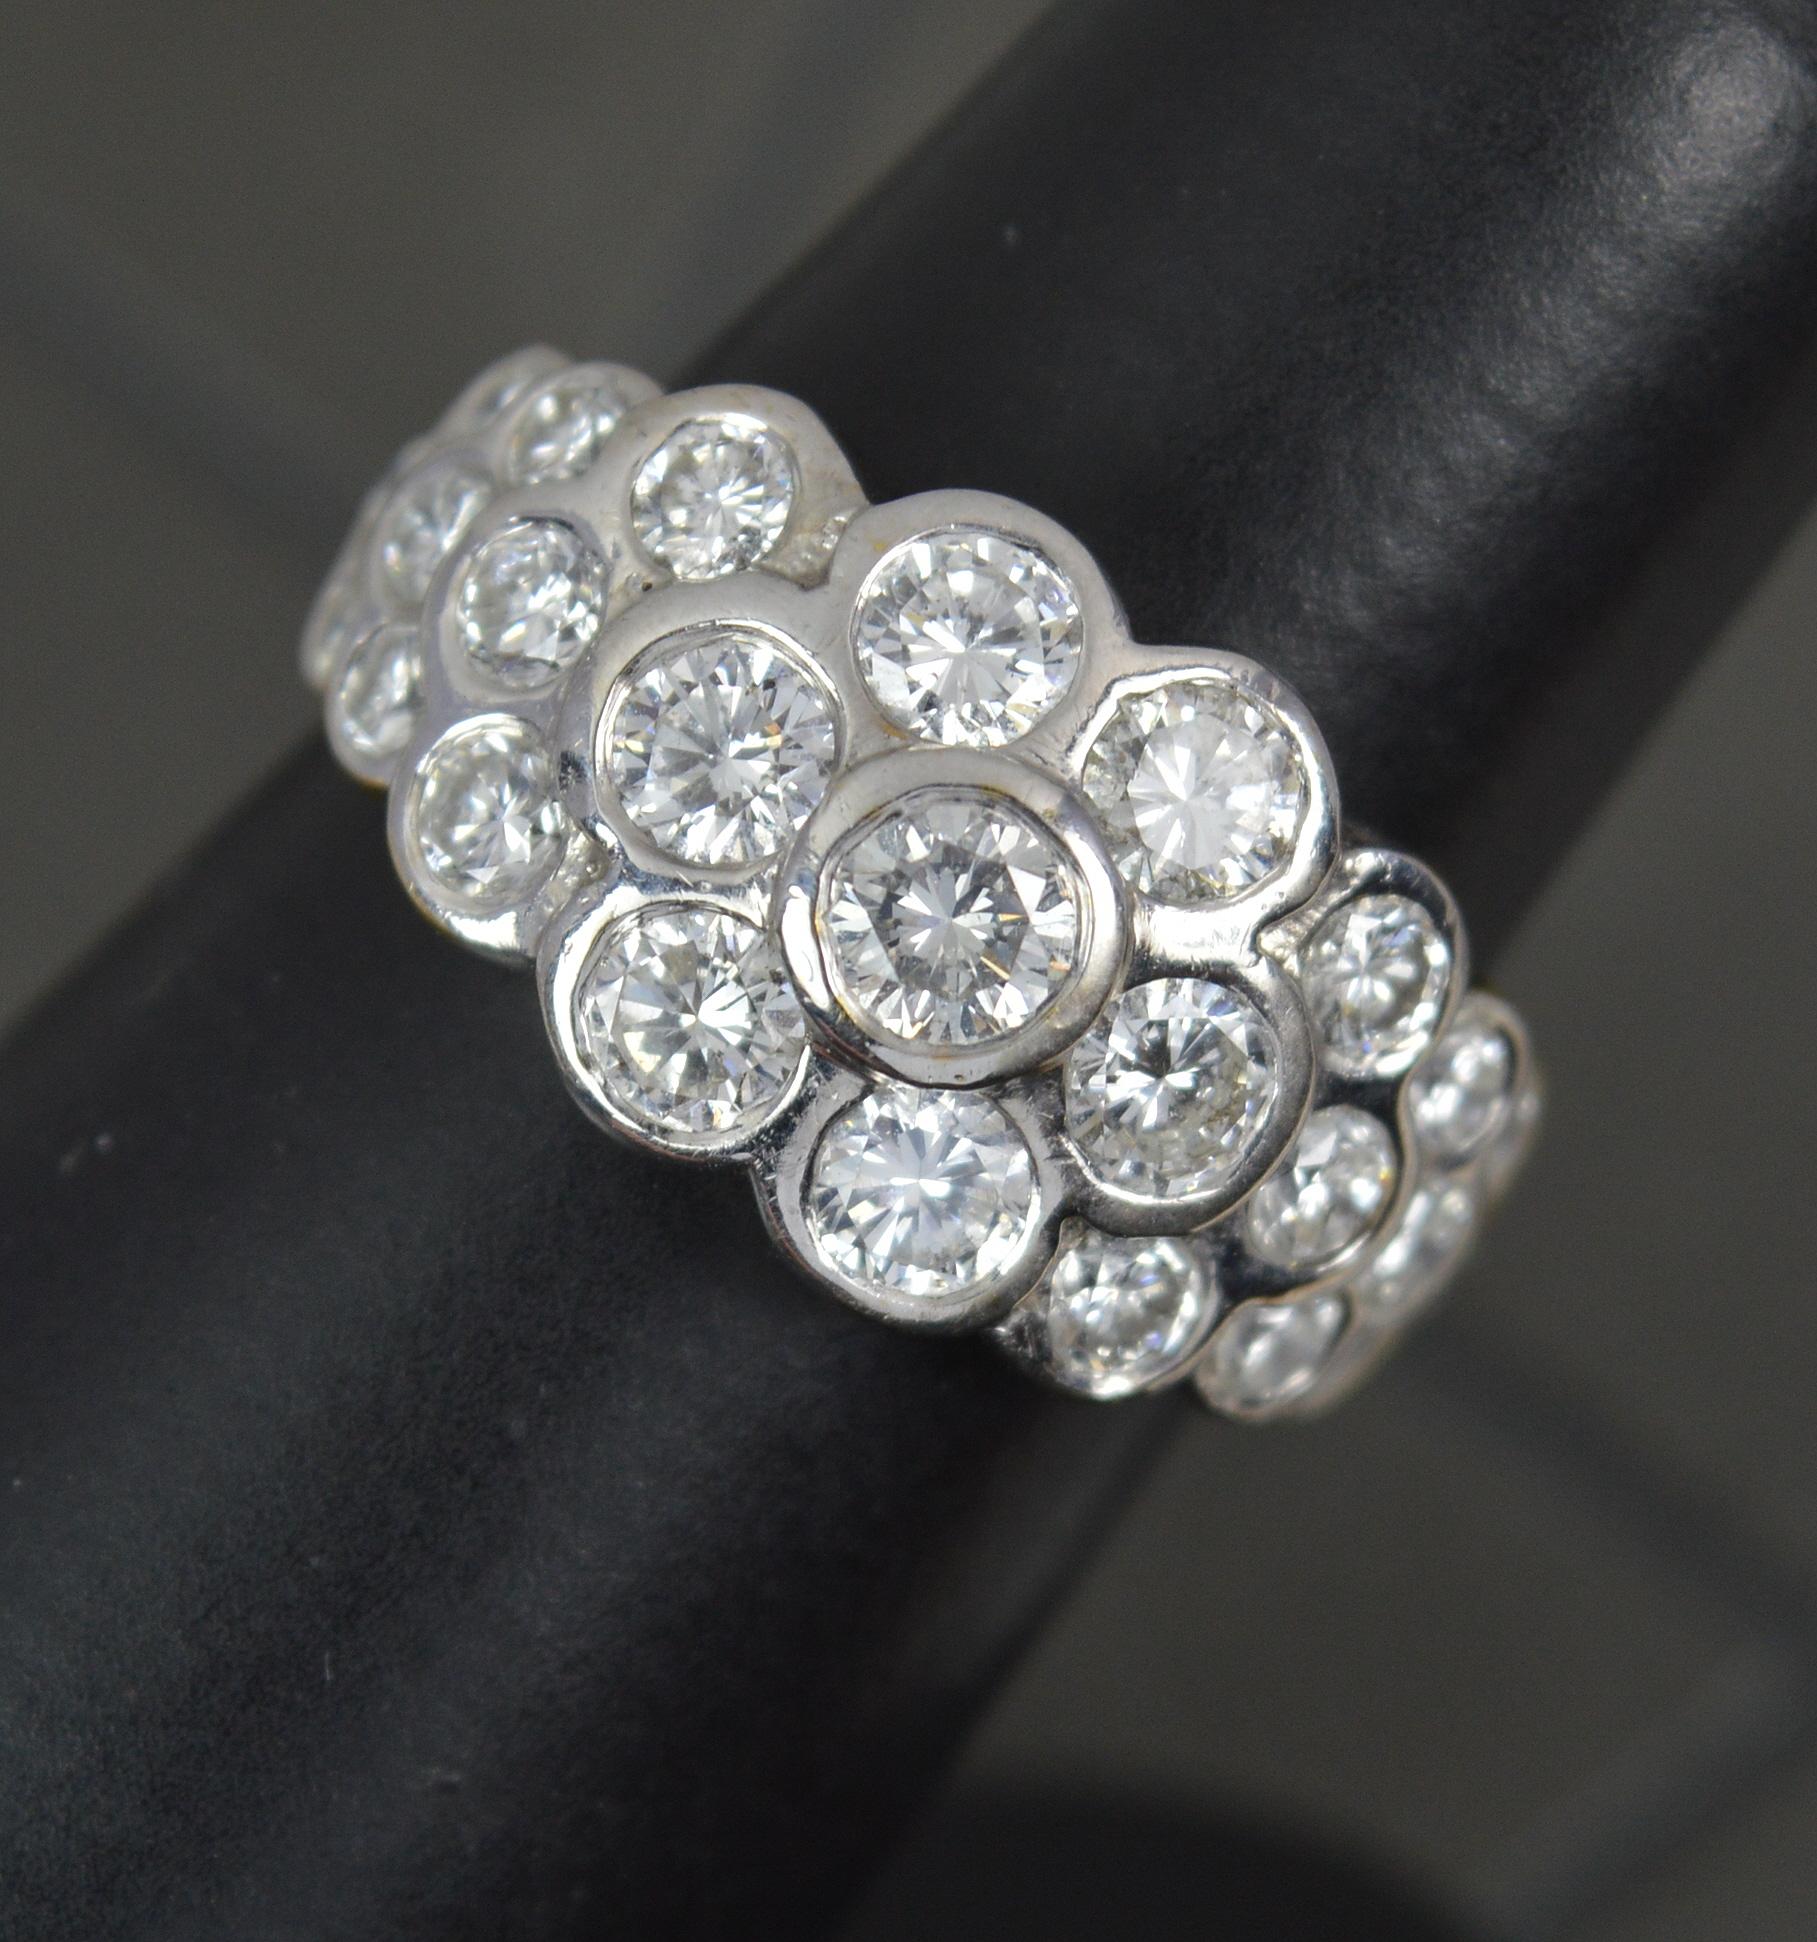 Quality 2.00 Carat Diamond and 18 Carat Gold Cluster Band Ring For Sale 7